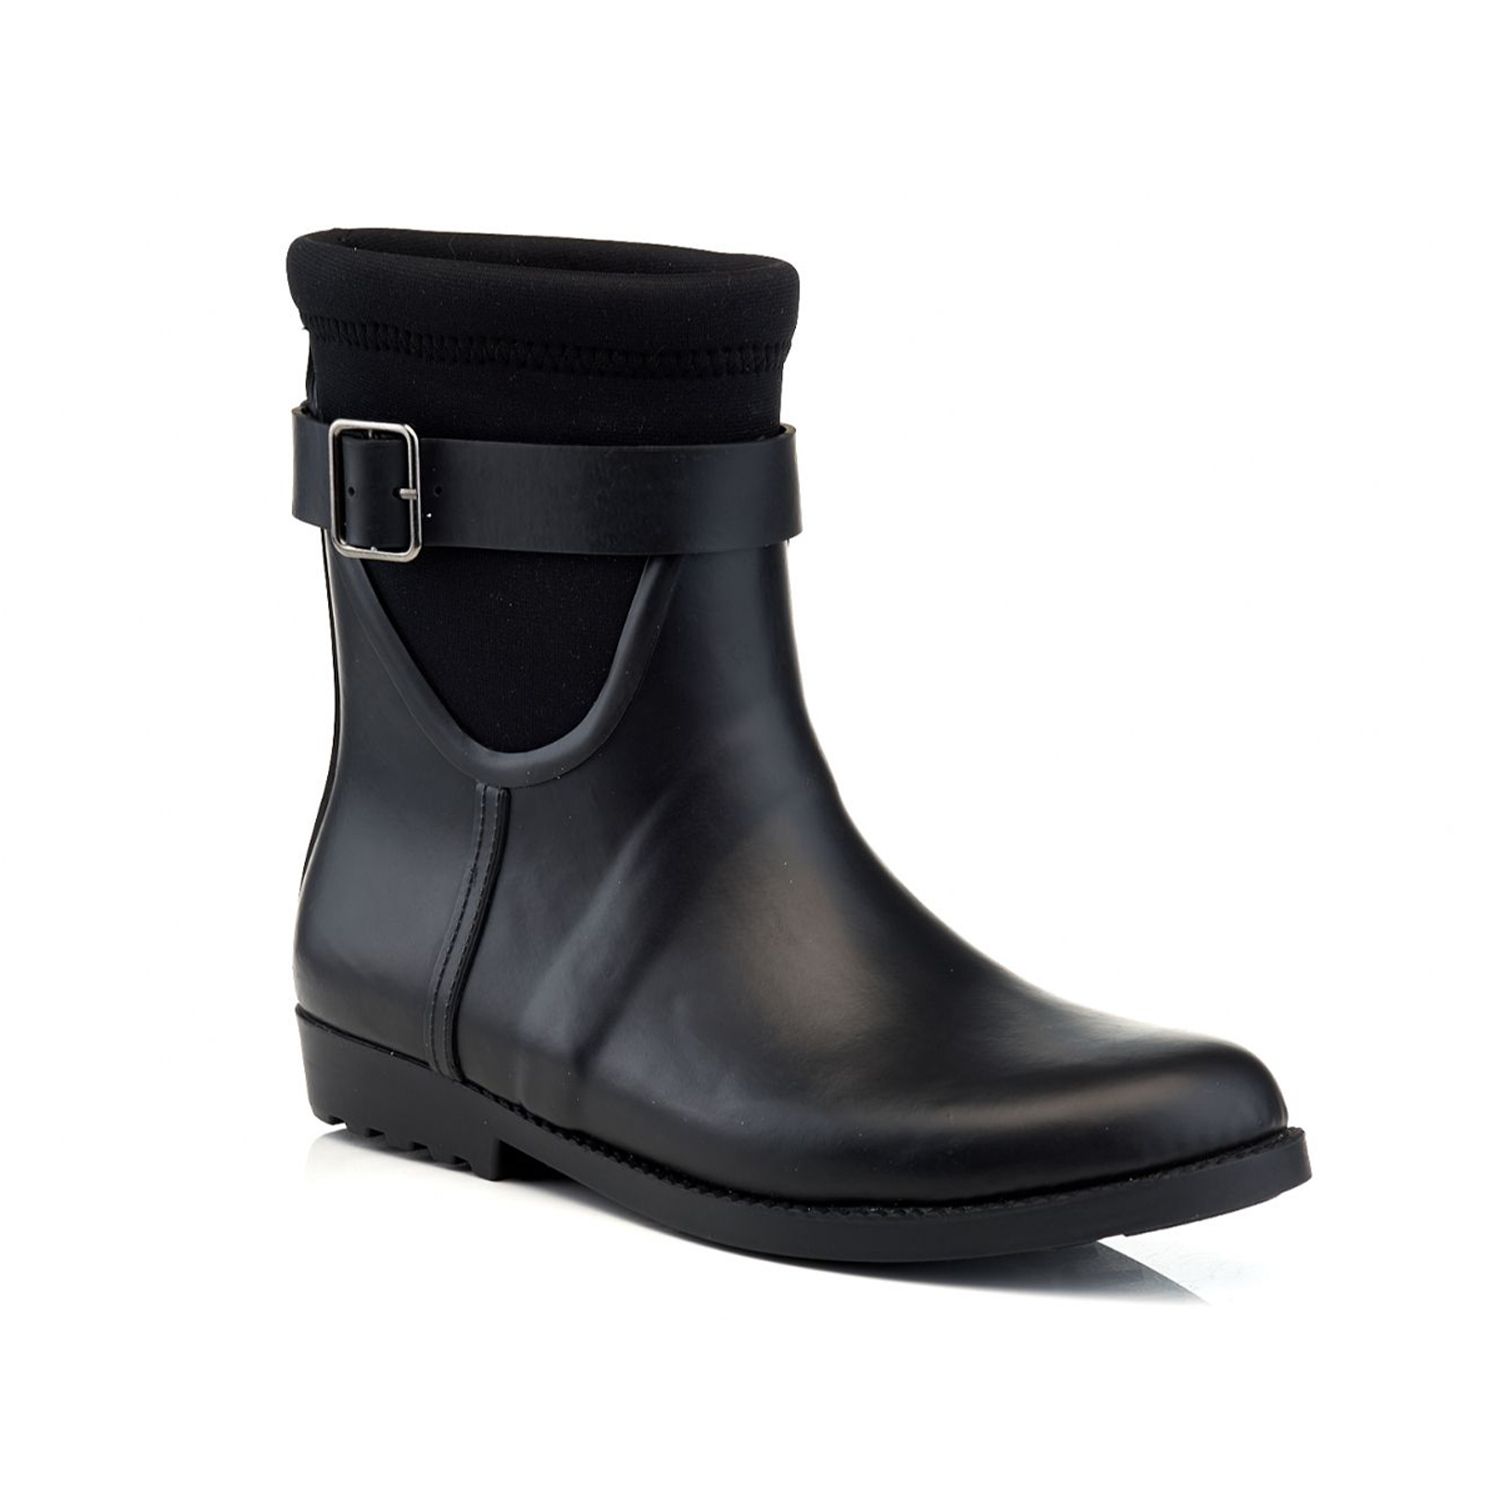 Image for Henry Ferrera French-100 Women's Rain Boots at Kohl's.